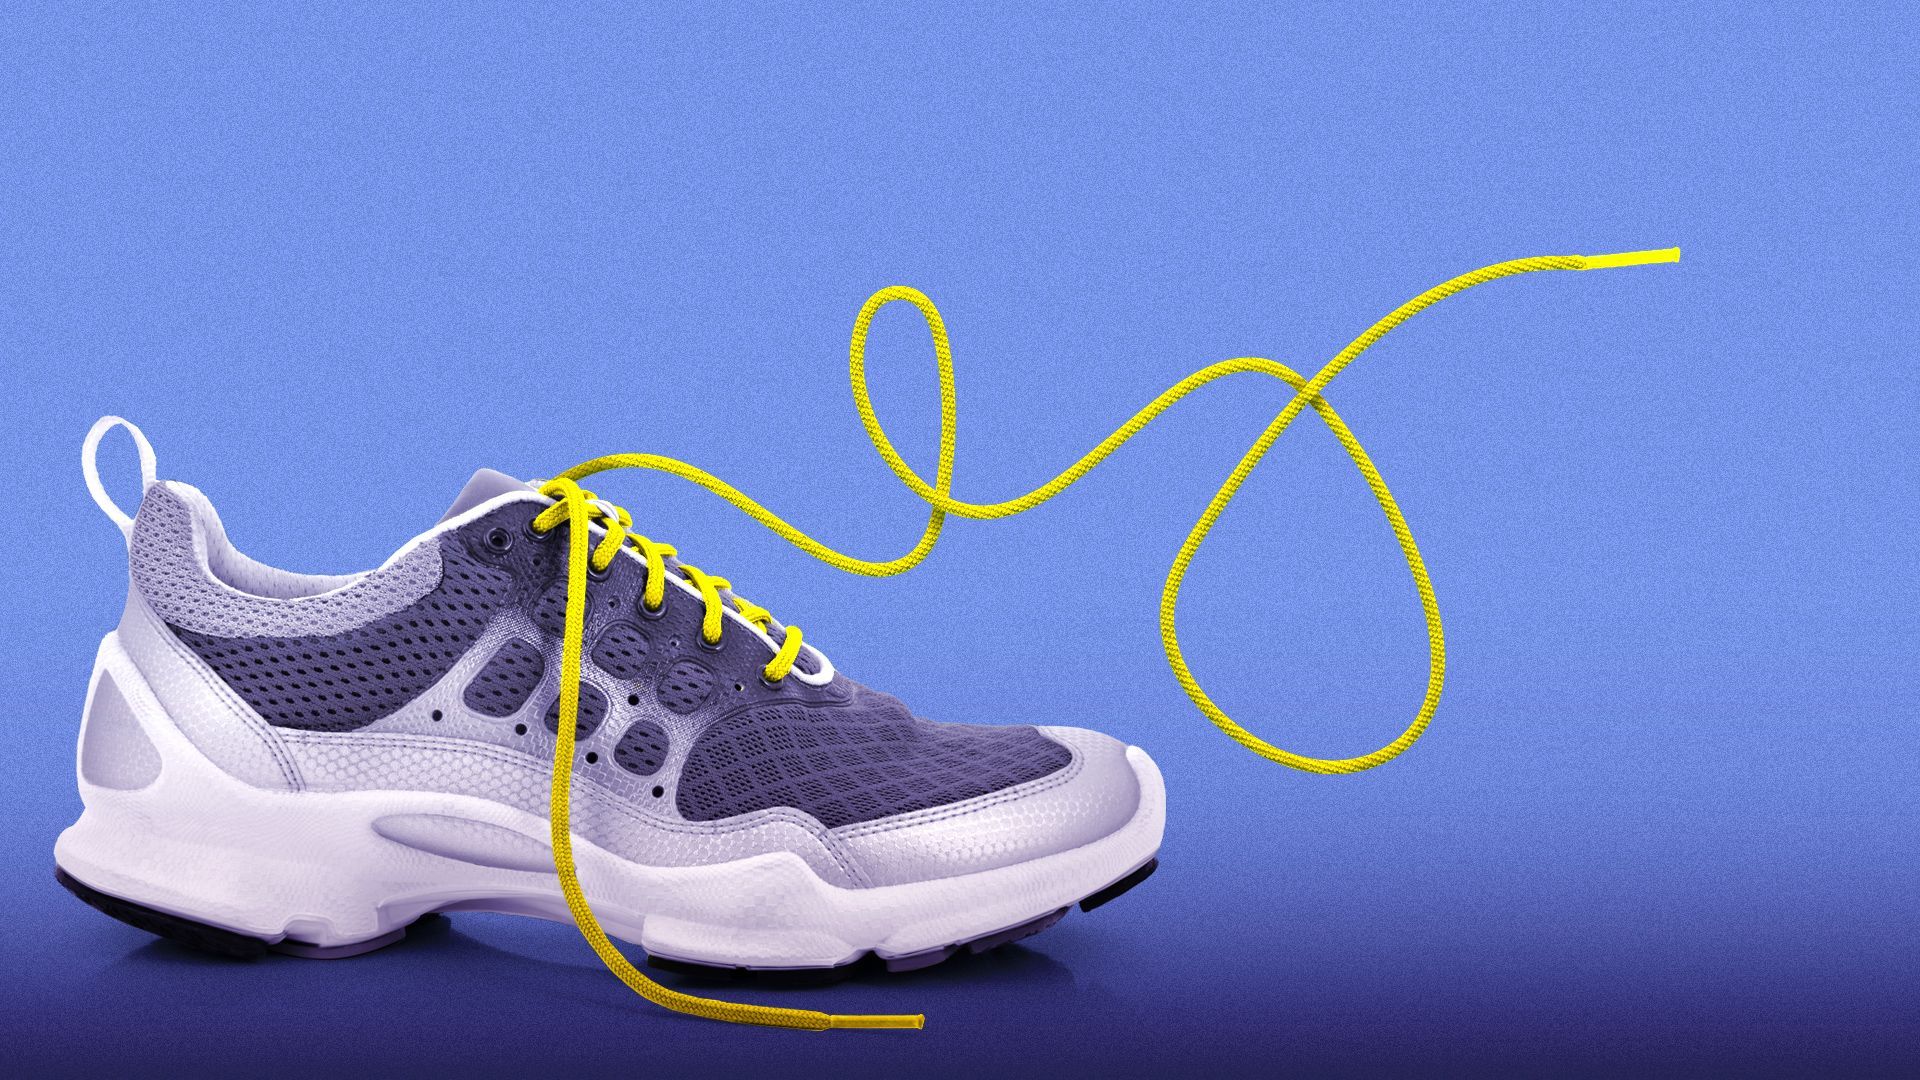 Illustration of a sneaker with one straight lace, and one loopy and wavy lace.